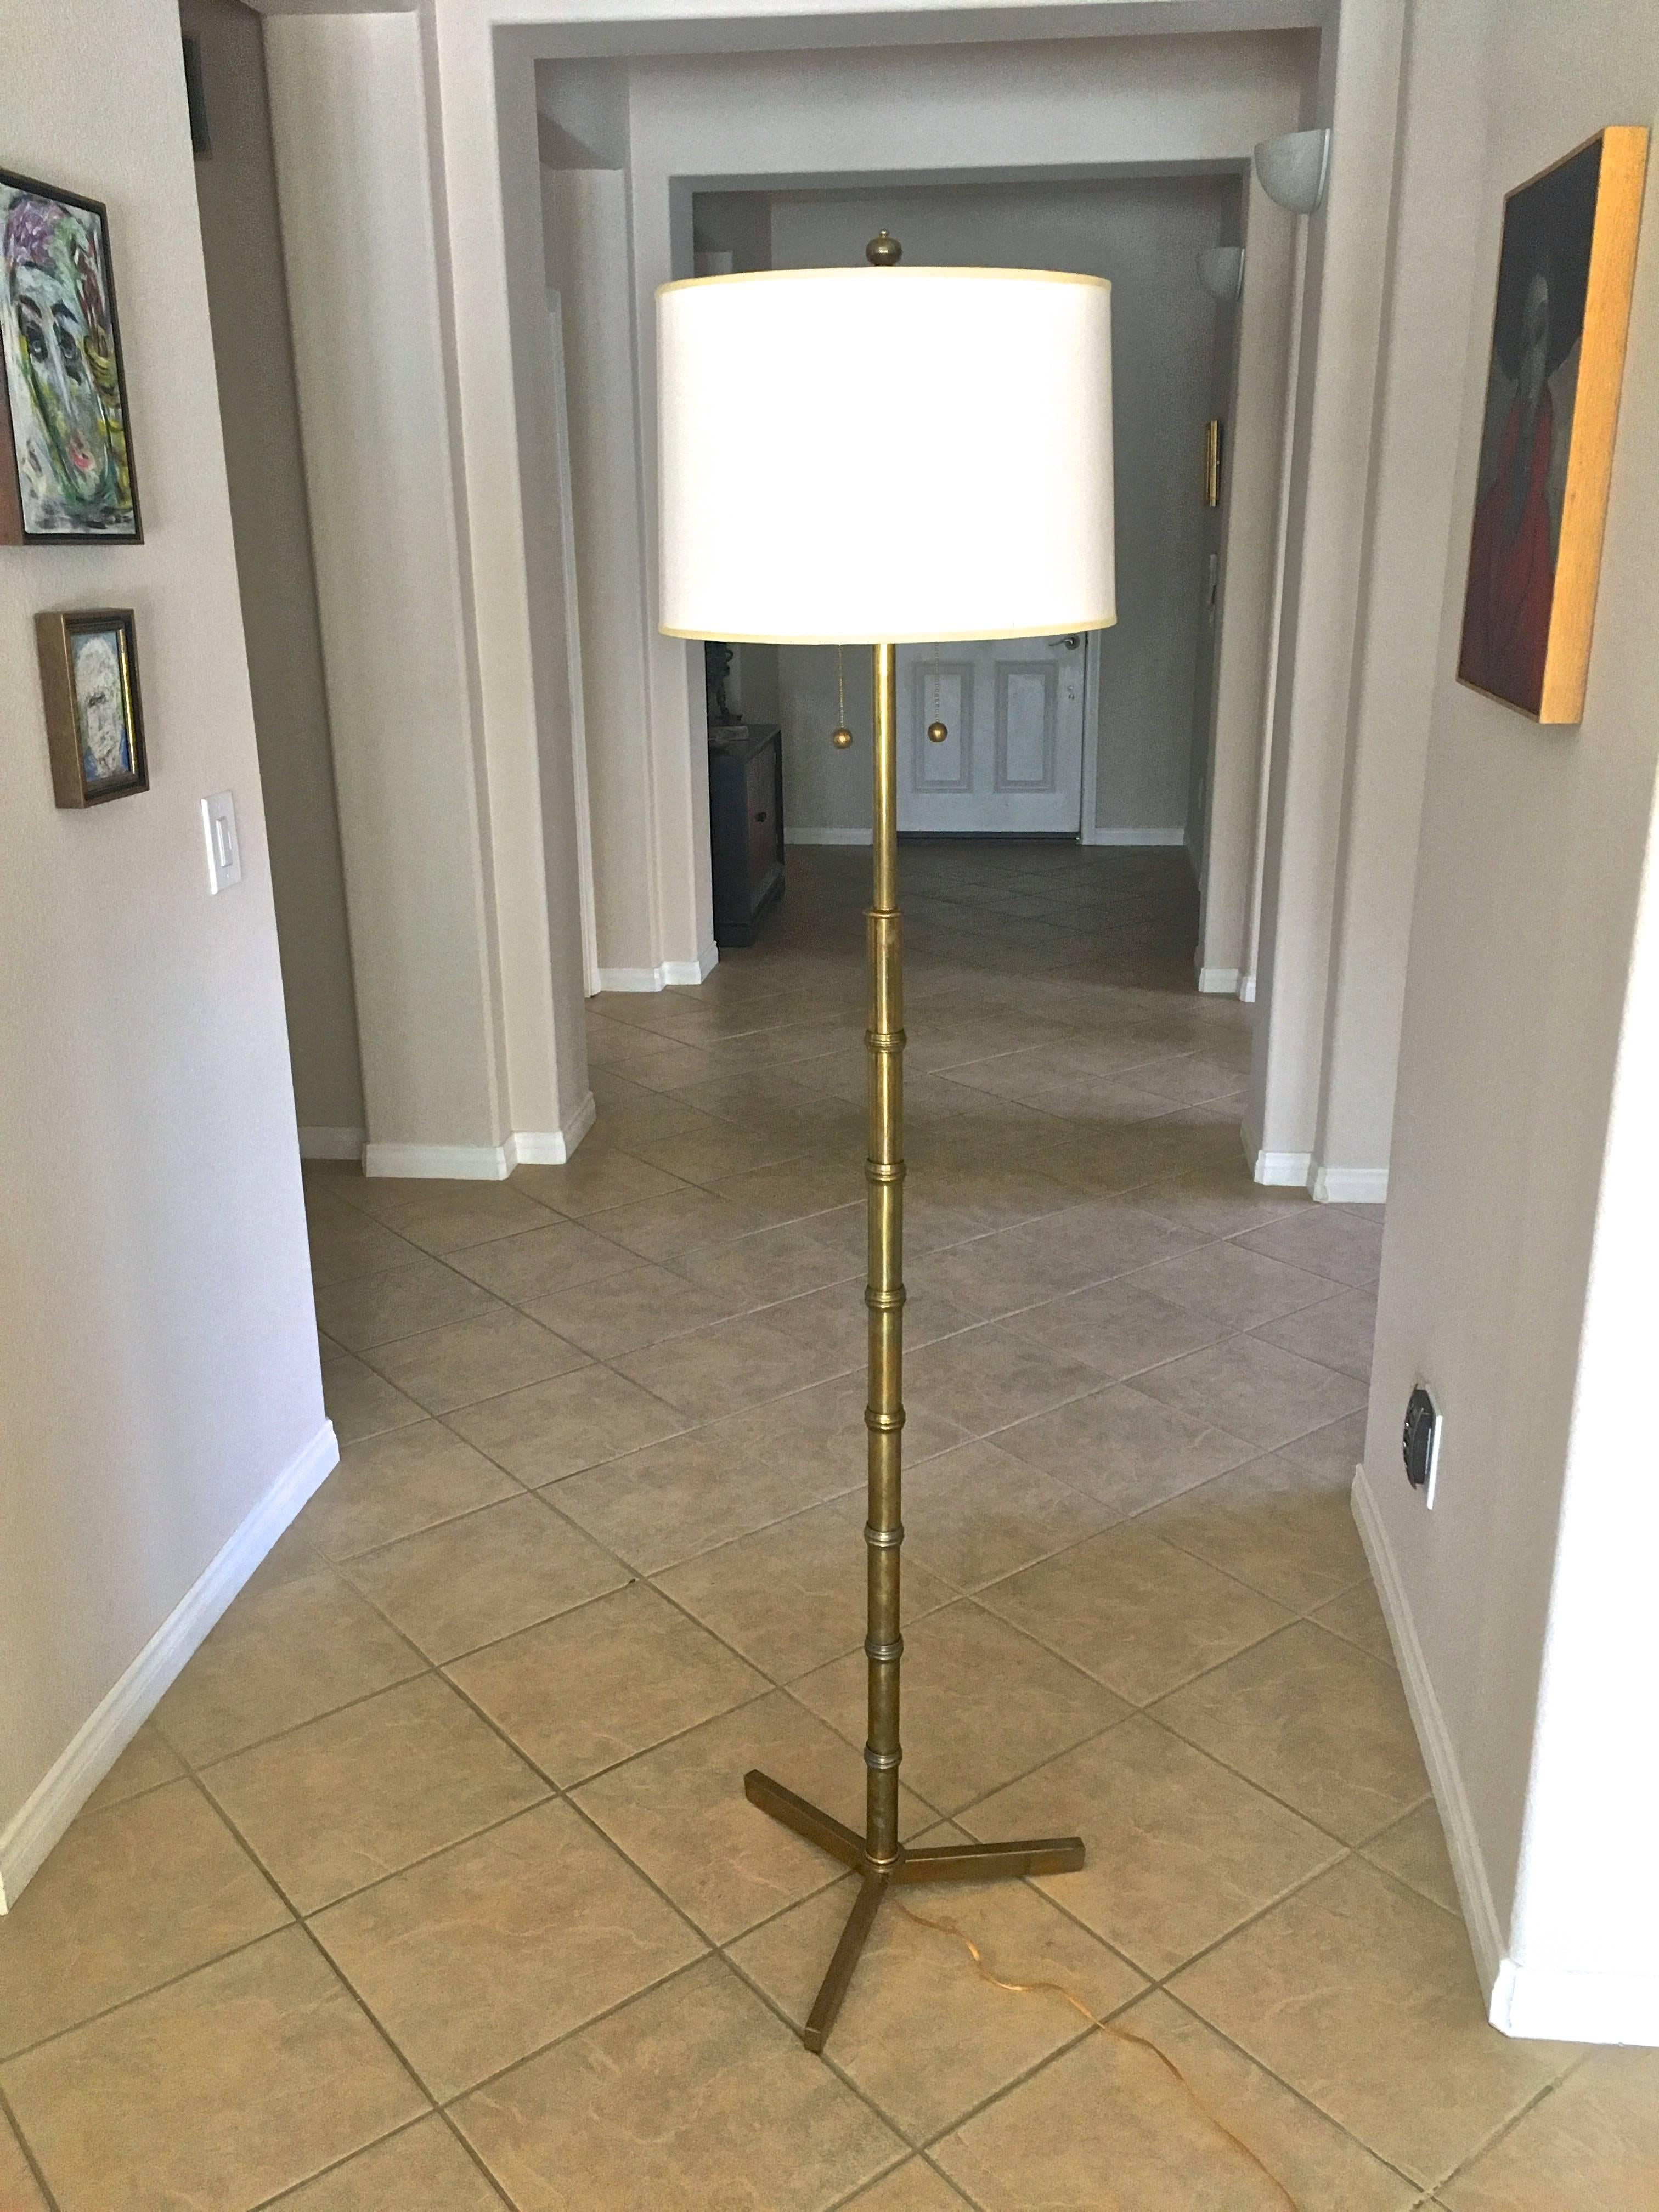 Faux brass bamboo floor lamp with double sockets lights. Rewired. Shade not include for display only.
Measures: 17